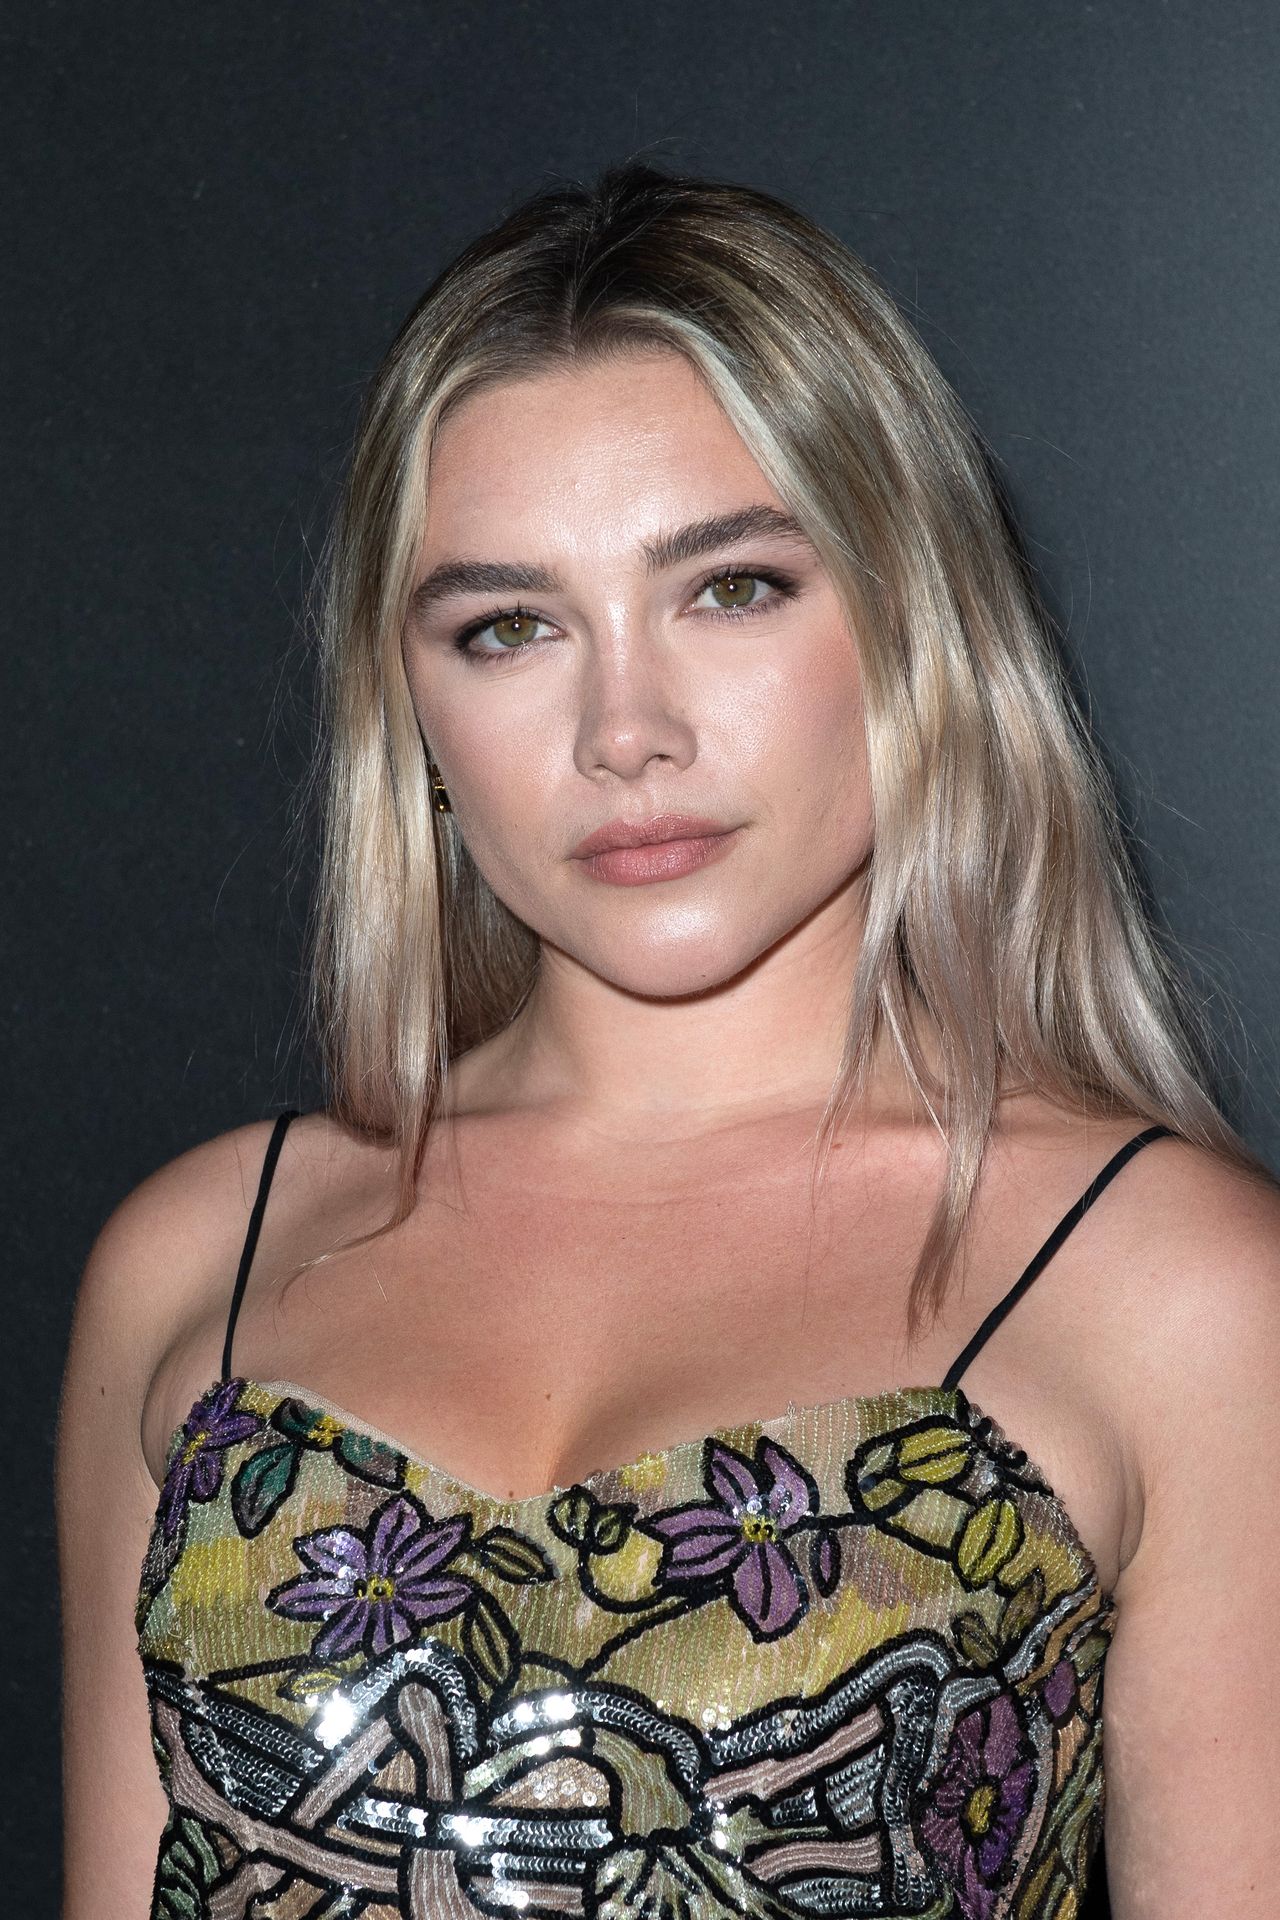 Florence Pugh Shows Her Cleavage & Panties At The Louis Vuitton Fashion Show 0021